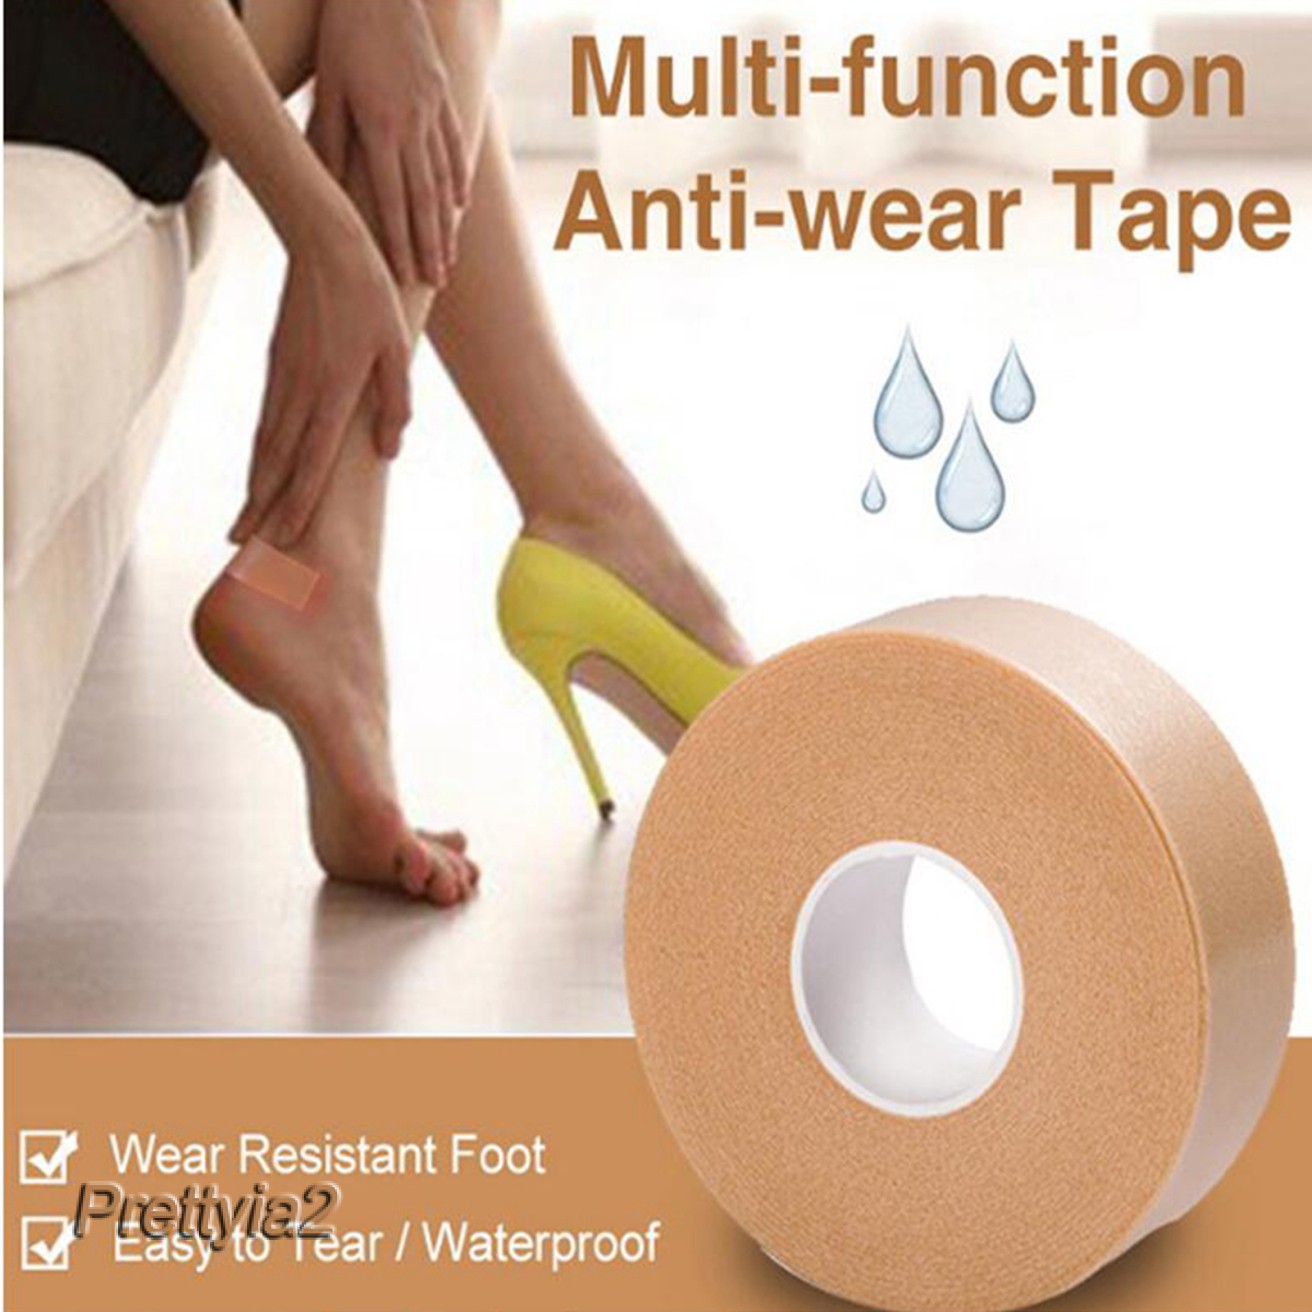 Foot Heel Sticker Skin Bandage with Extra Templates Anti-wear Blister Pads gift